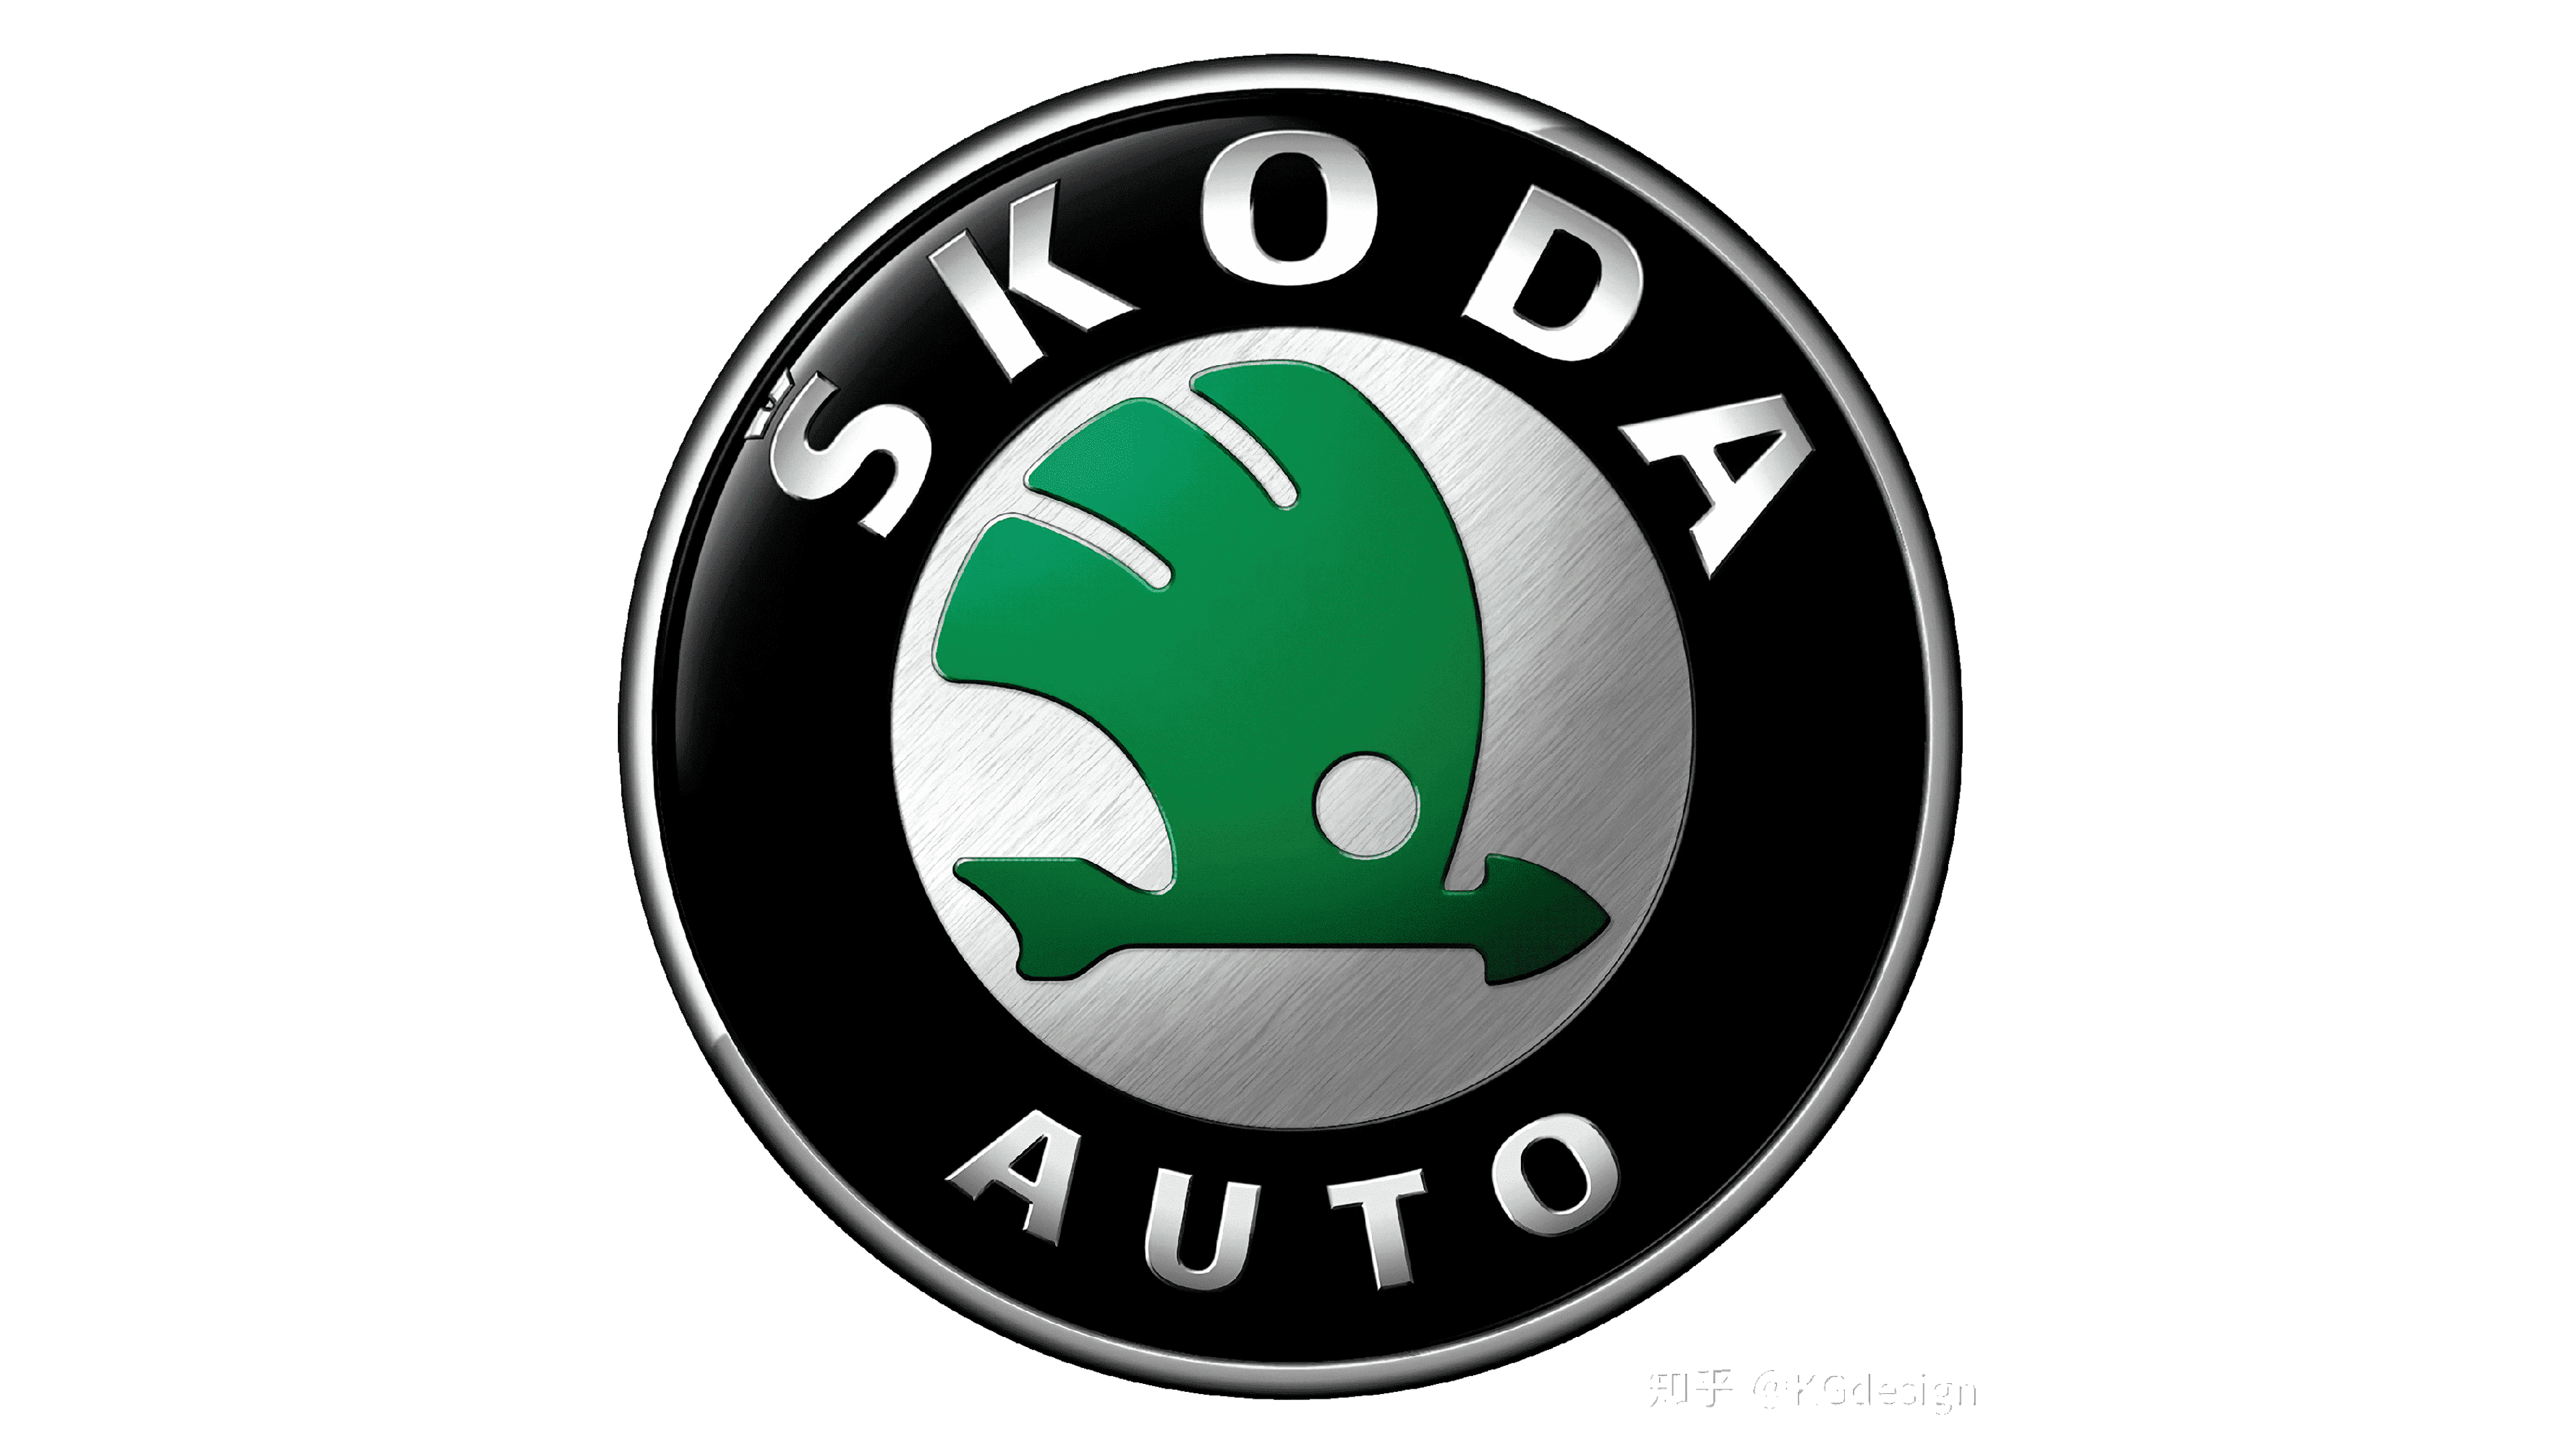 Škoda Logo and symbol, meaning, history, PNG, brand